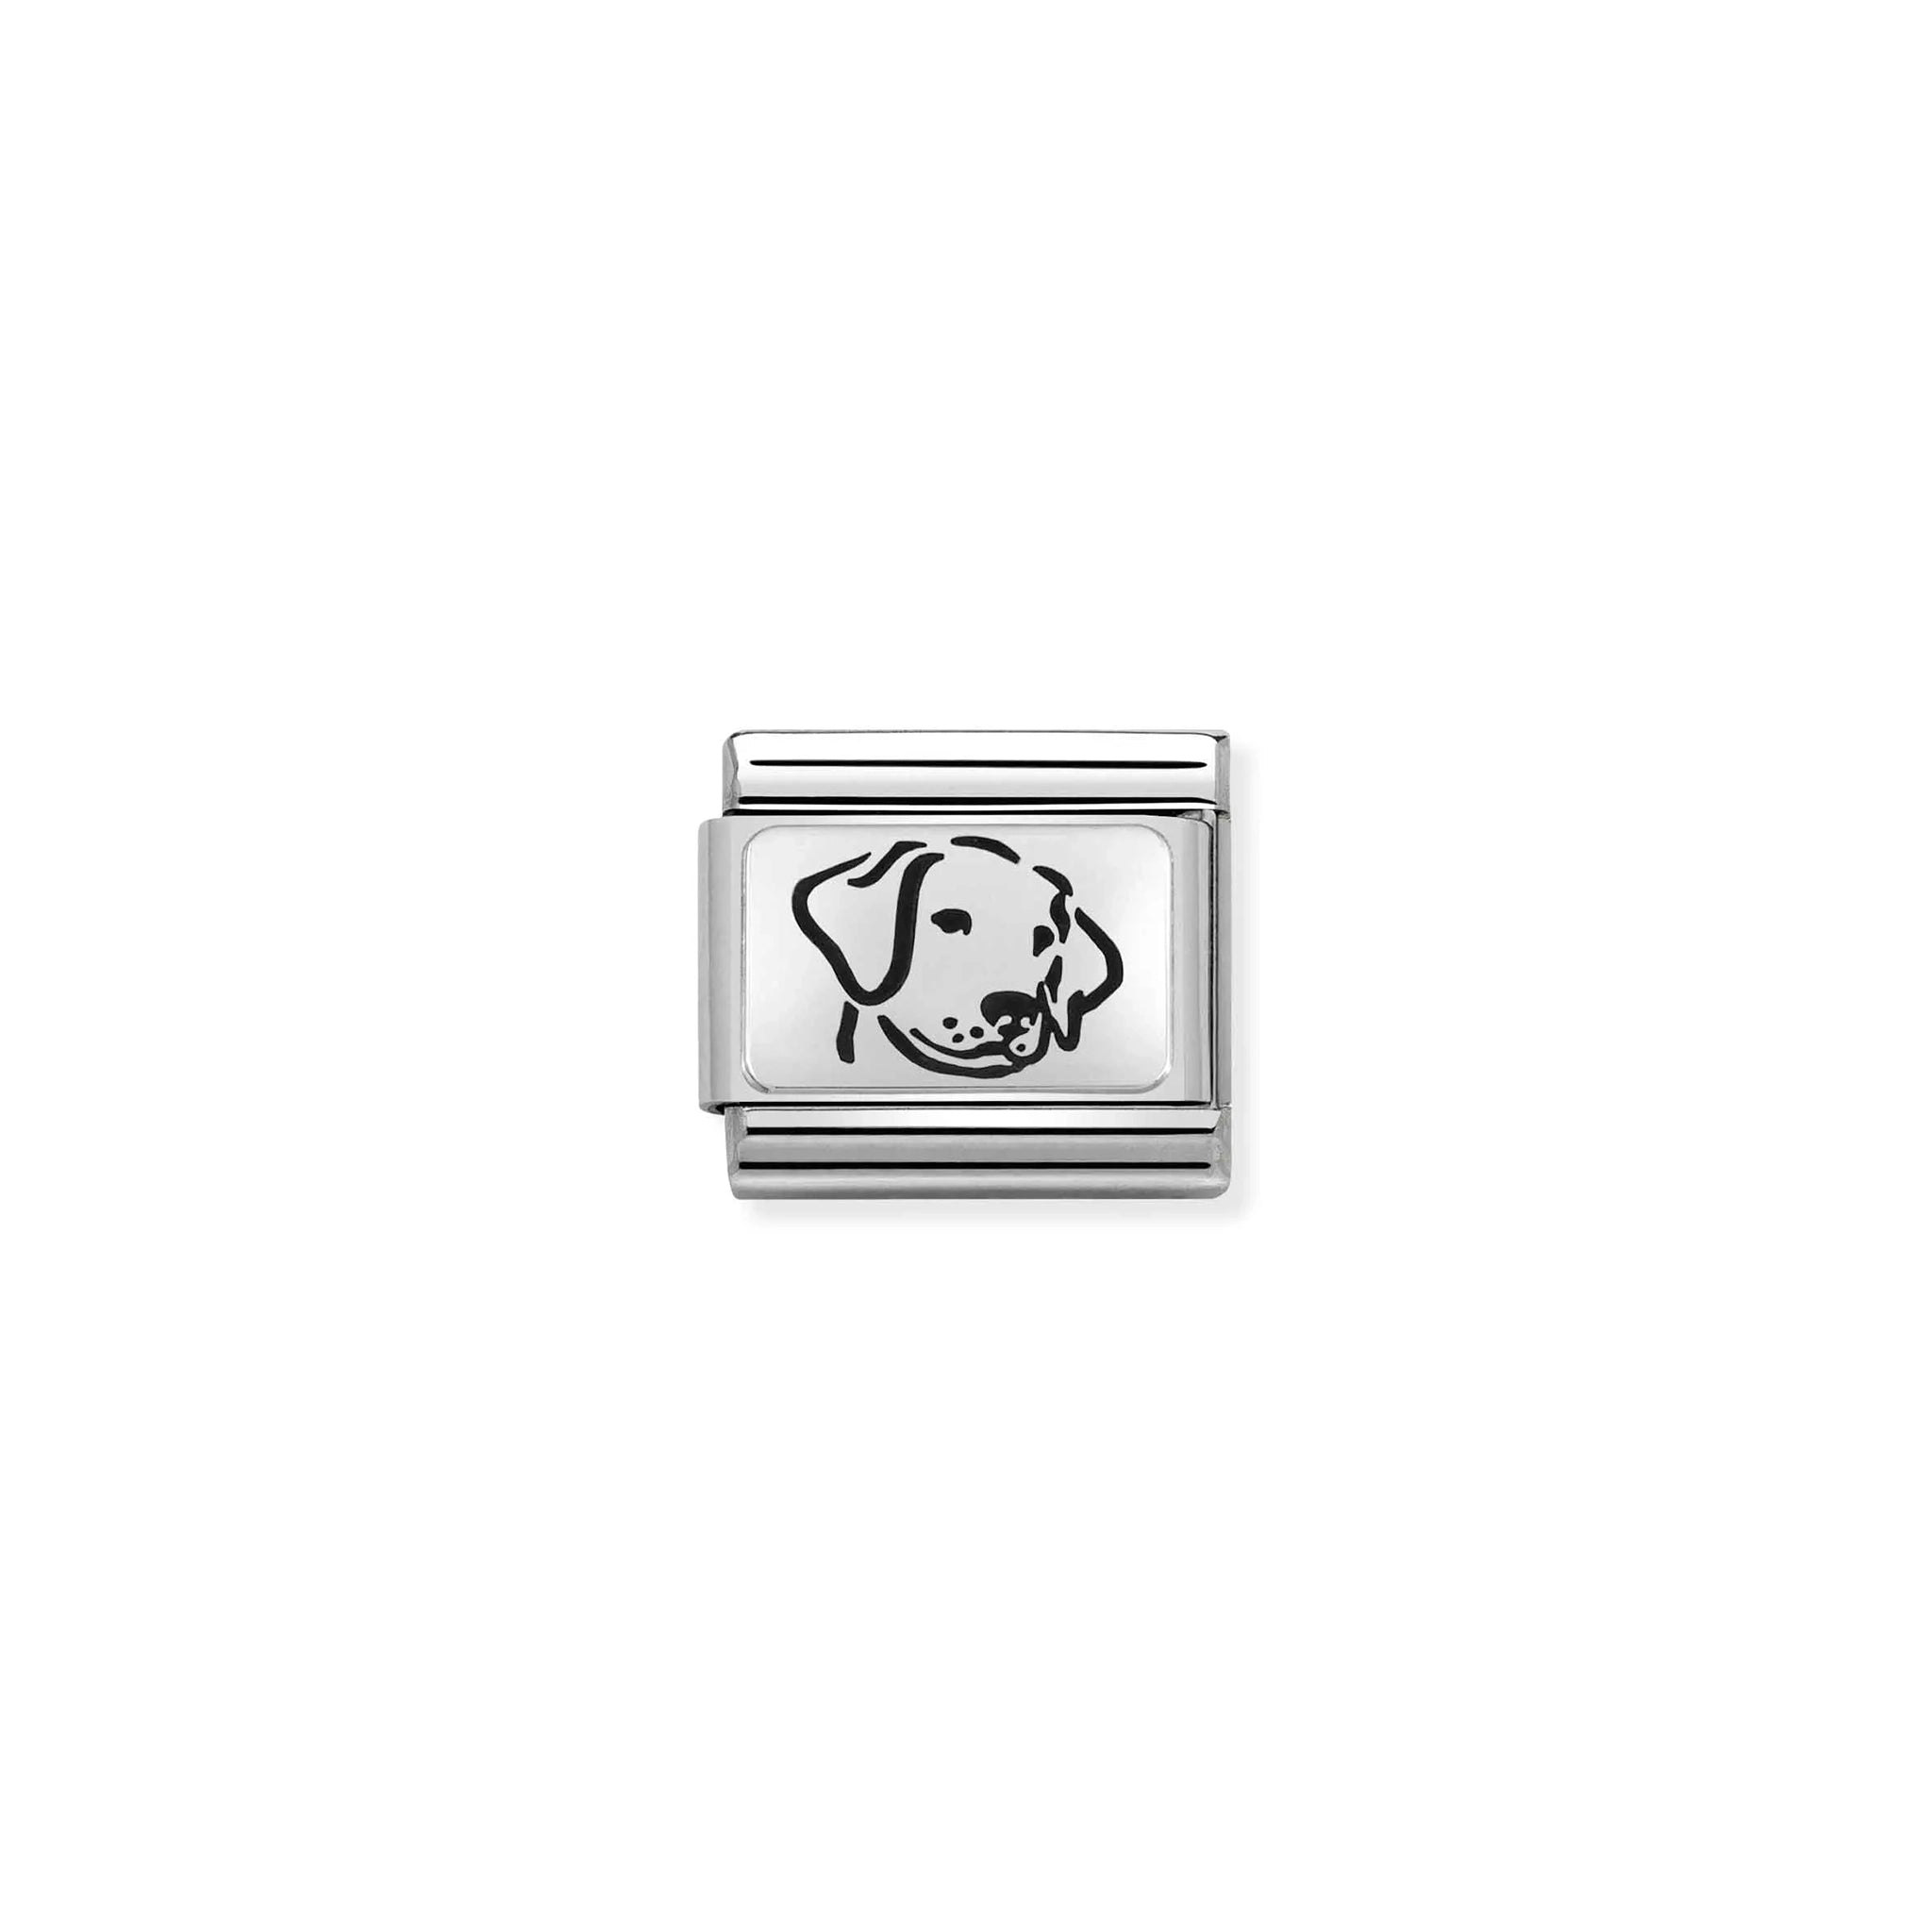 Nomination charm link featuring a silver plaque with an oxidised dog's face design